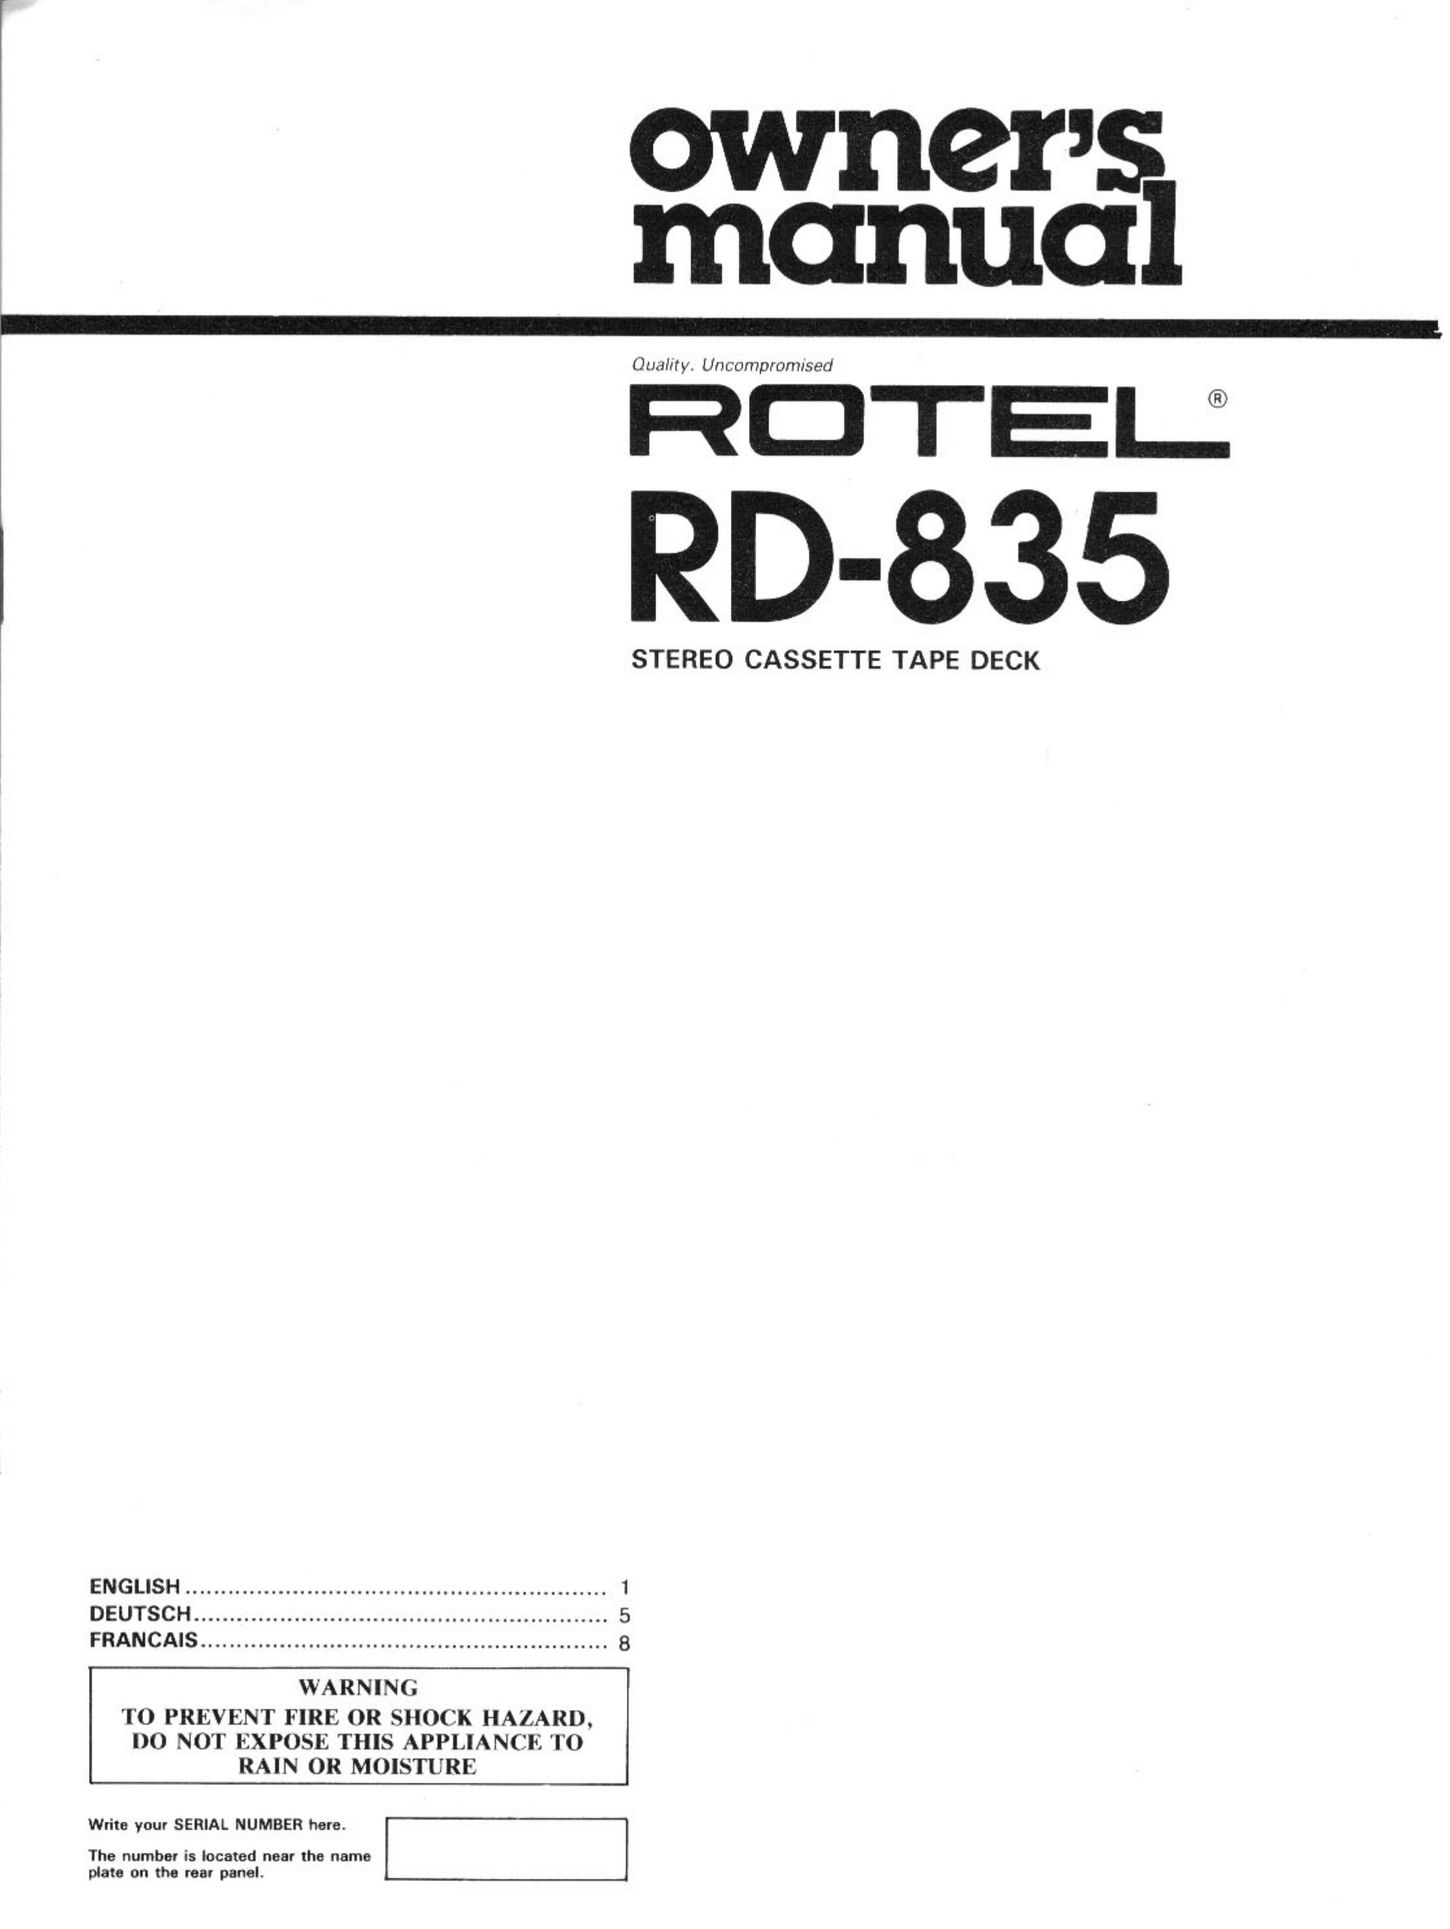 Rotel RD-835 Cassette Player User Manual